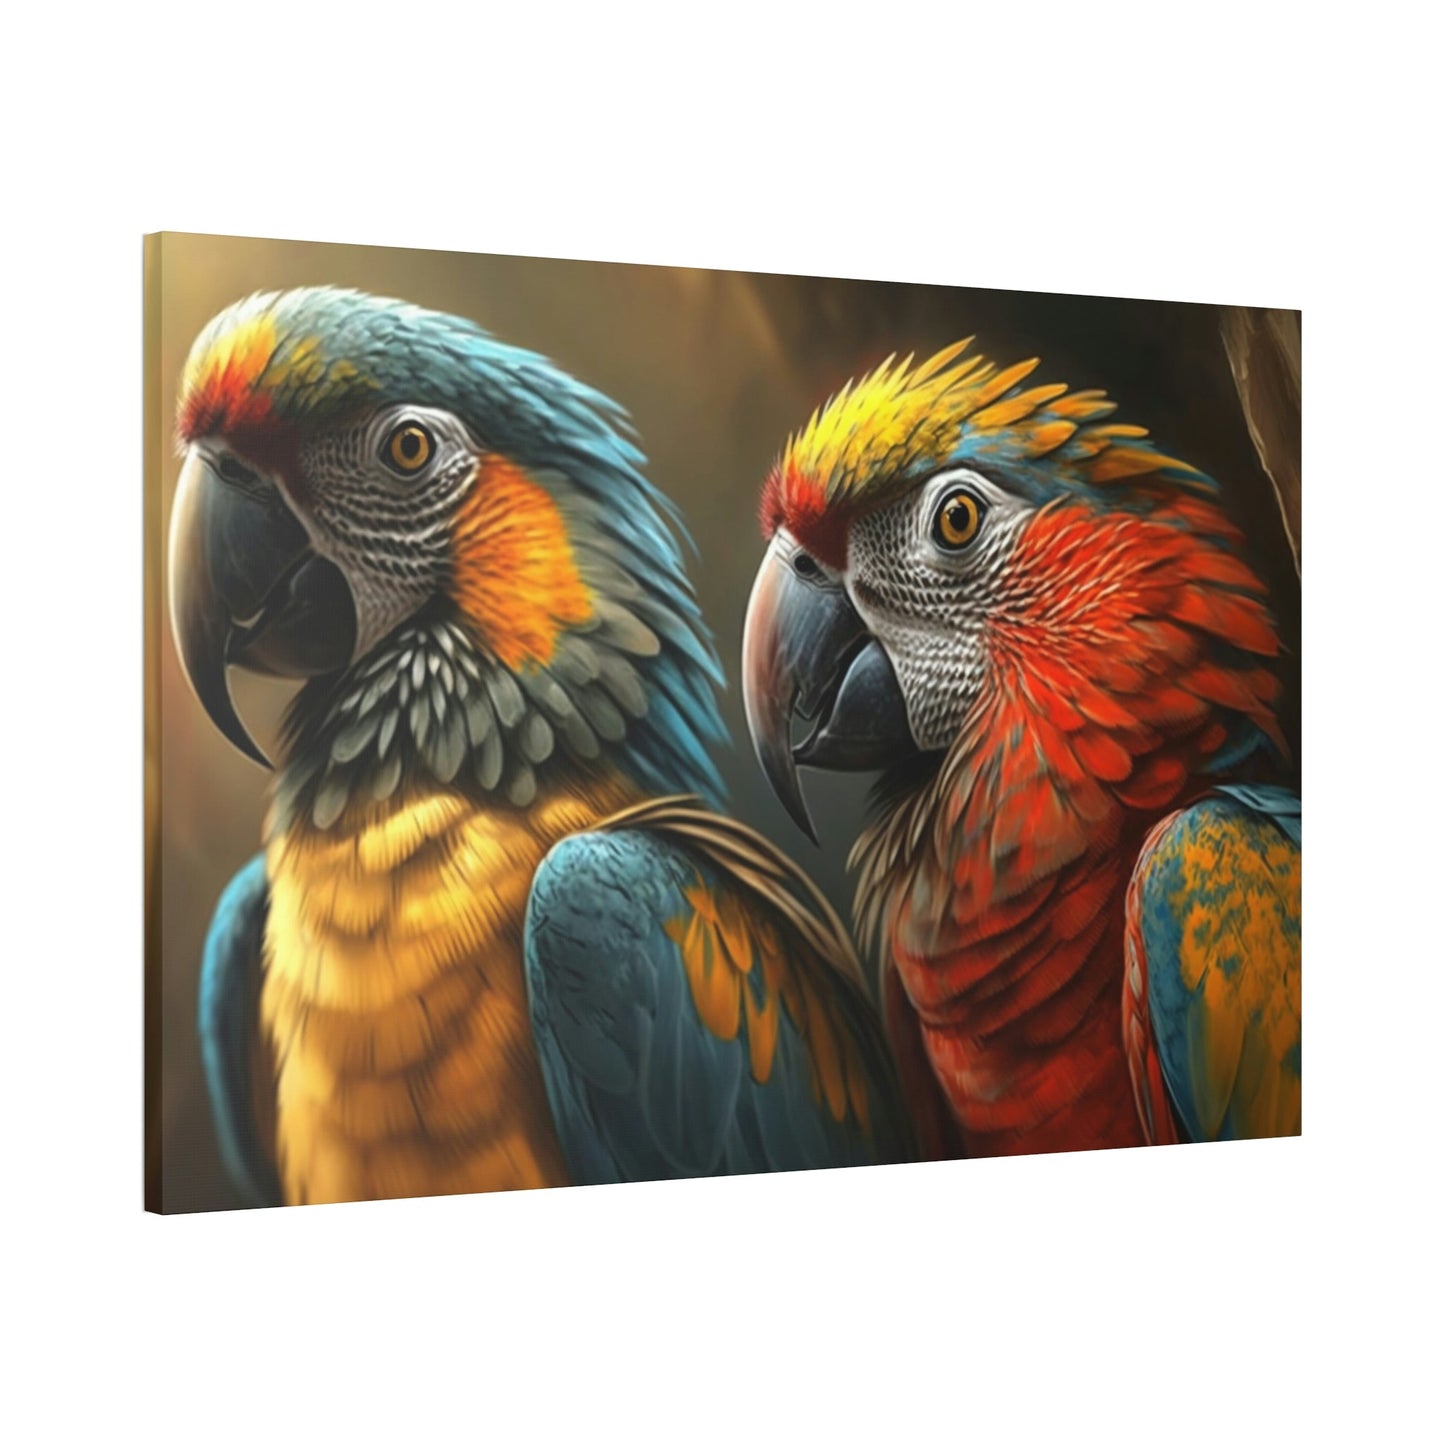 Parrot Serenade: A Canvas of Music and Nature's Harmony